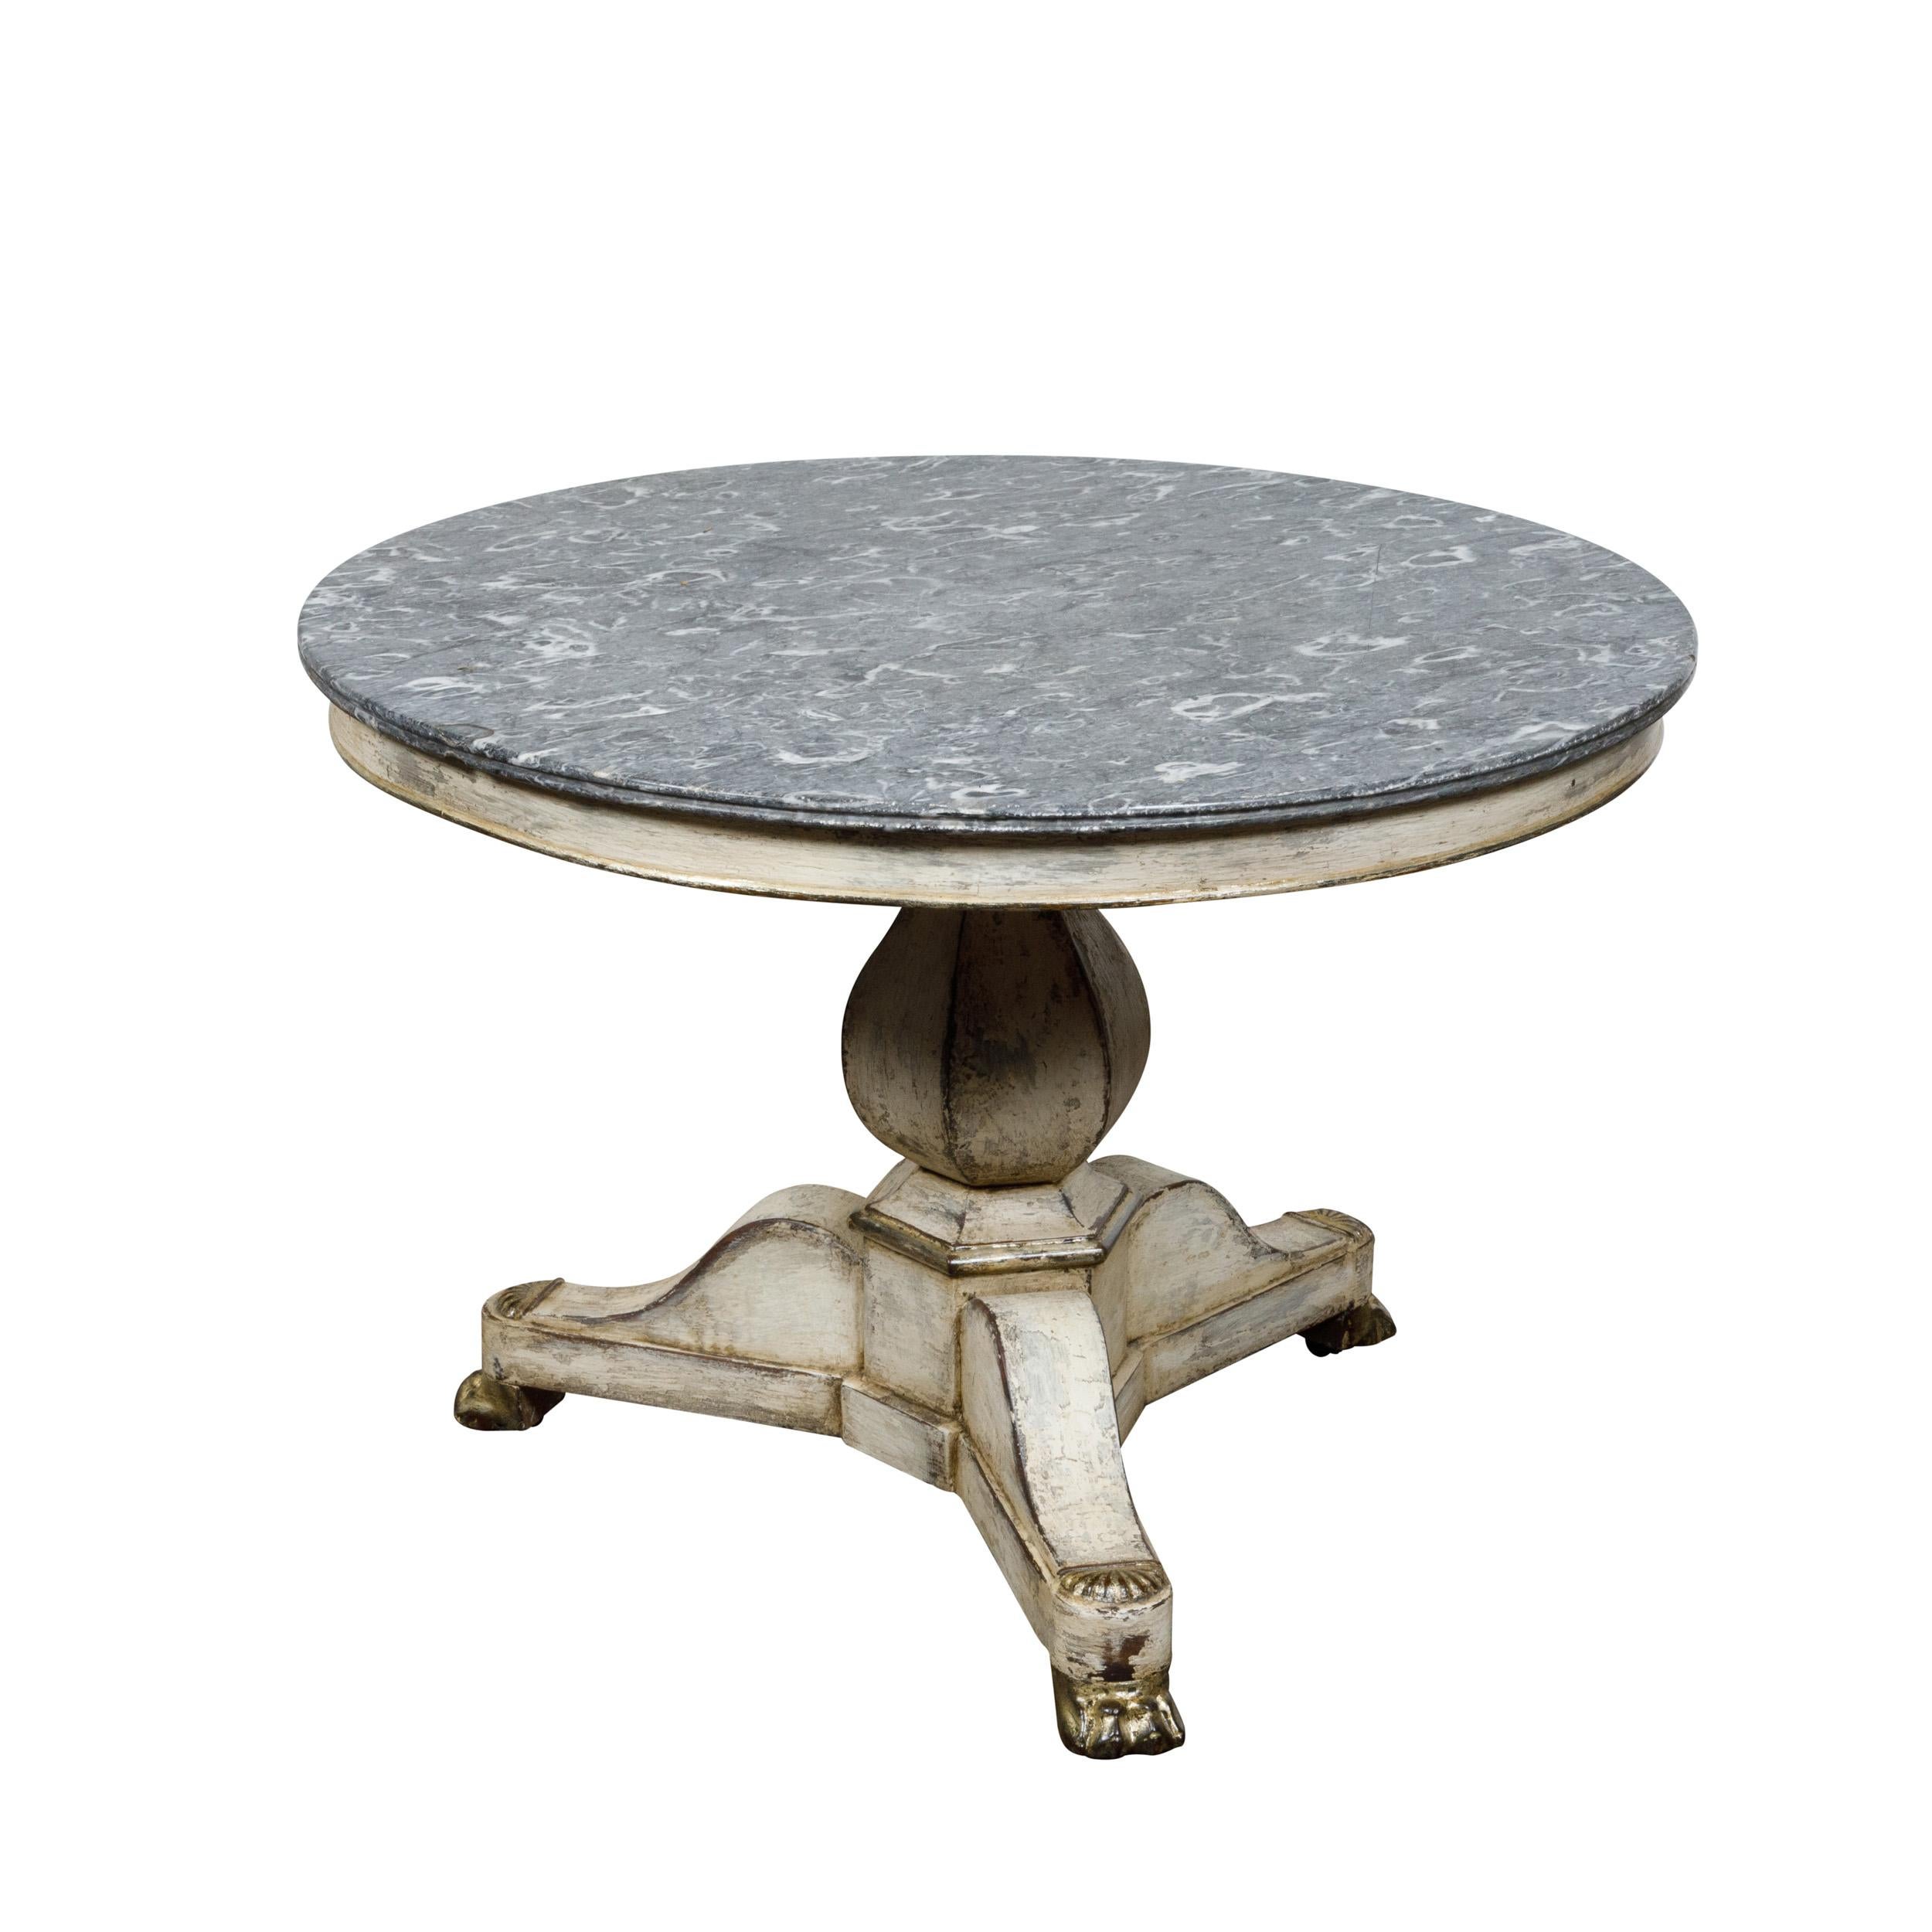 A French antique white painted table from the 19th century with circular variegated gray marble top, bulbous pedestal on tripartite base with carved giltwood lion paw feet. This French antique table, dating back to the 19th century, exudes a